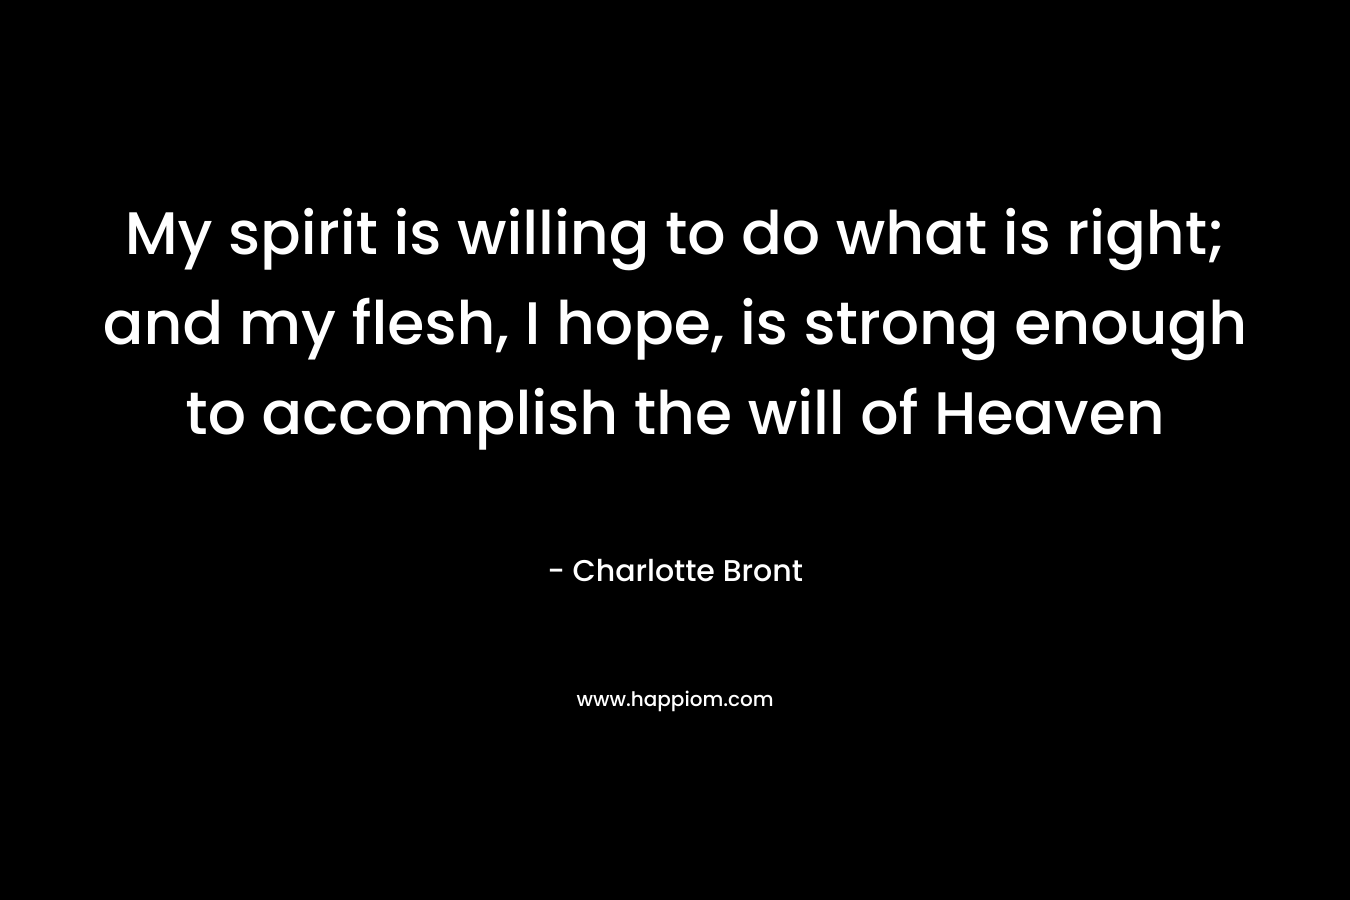 My spirit is willing to do what is right; and my flesh, I hope, is strong enough to accomplish the will of Heaven